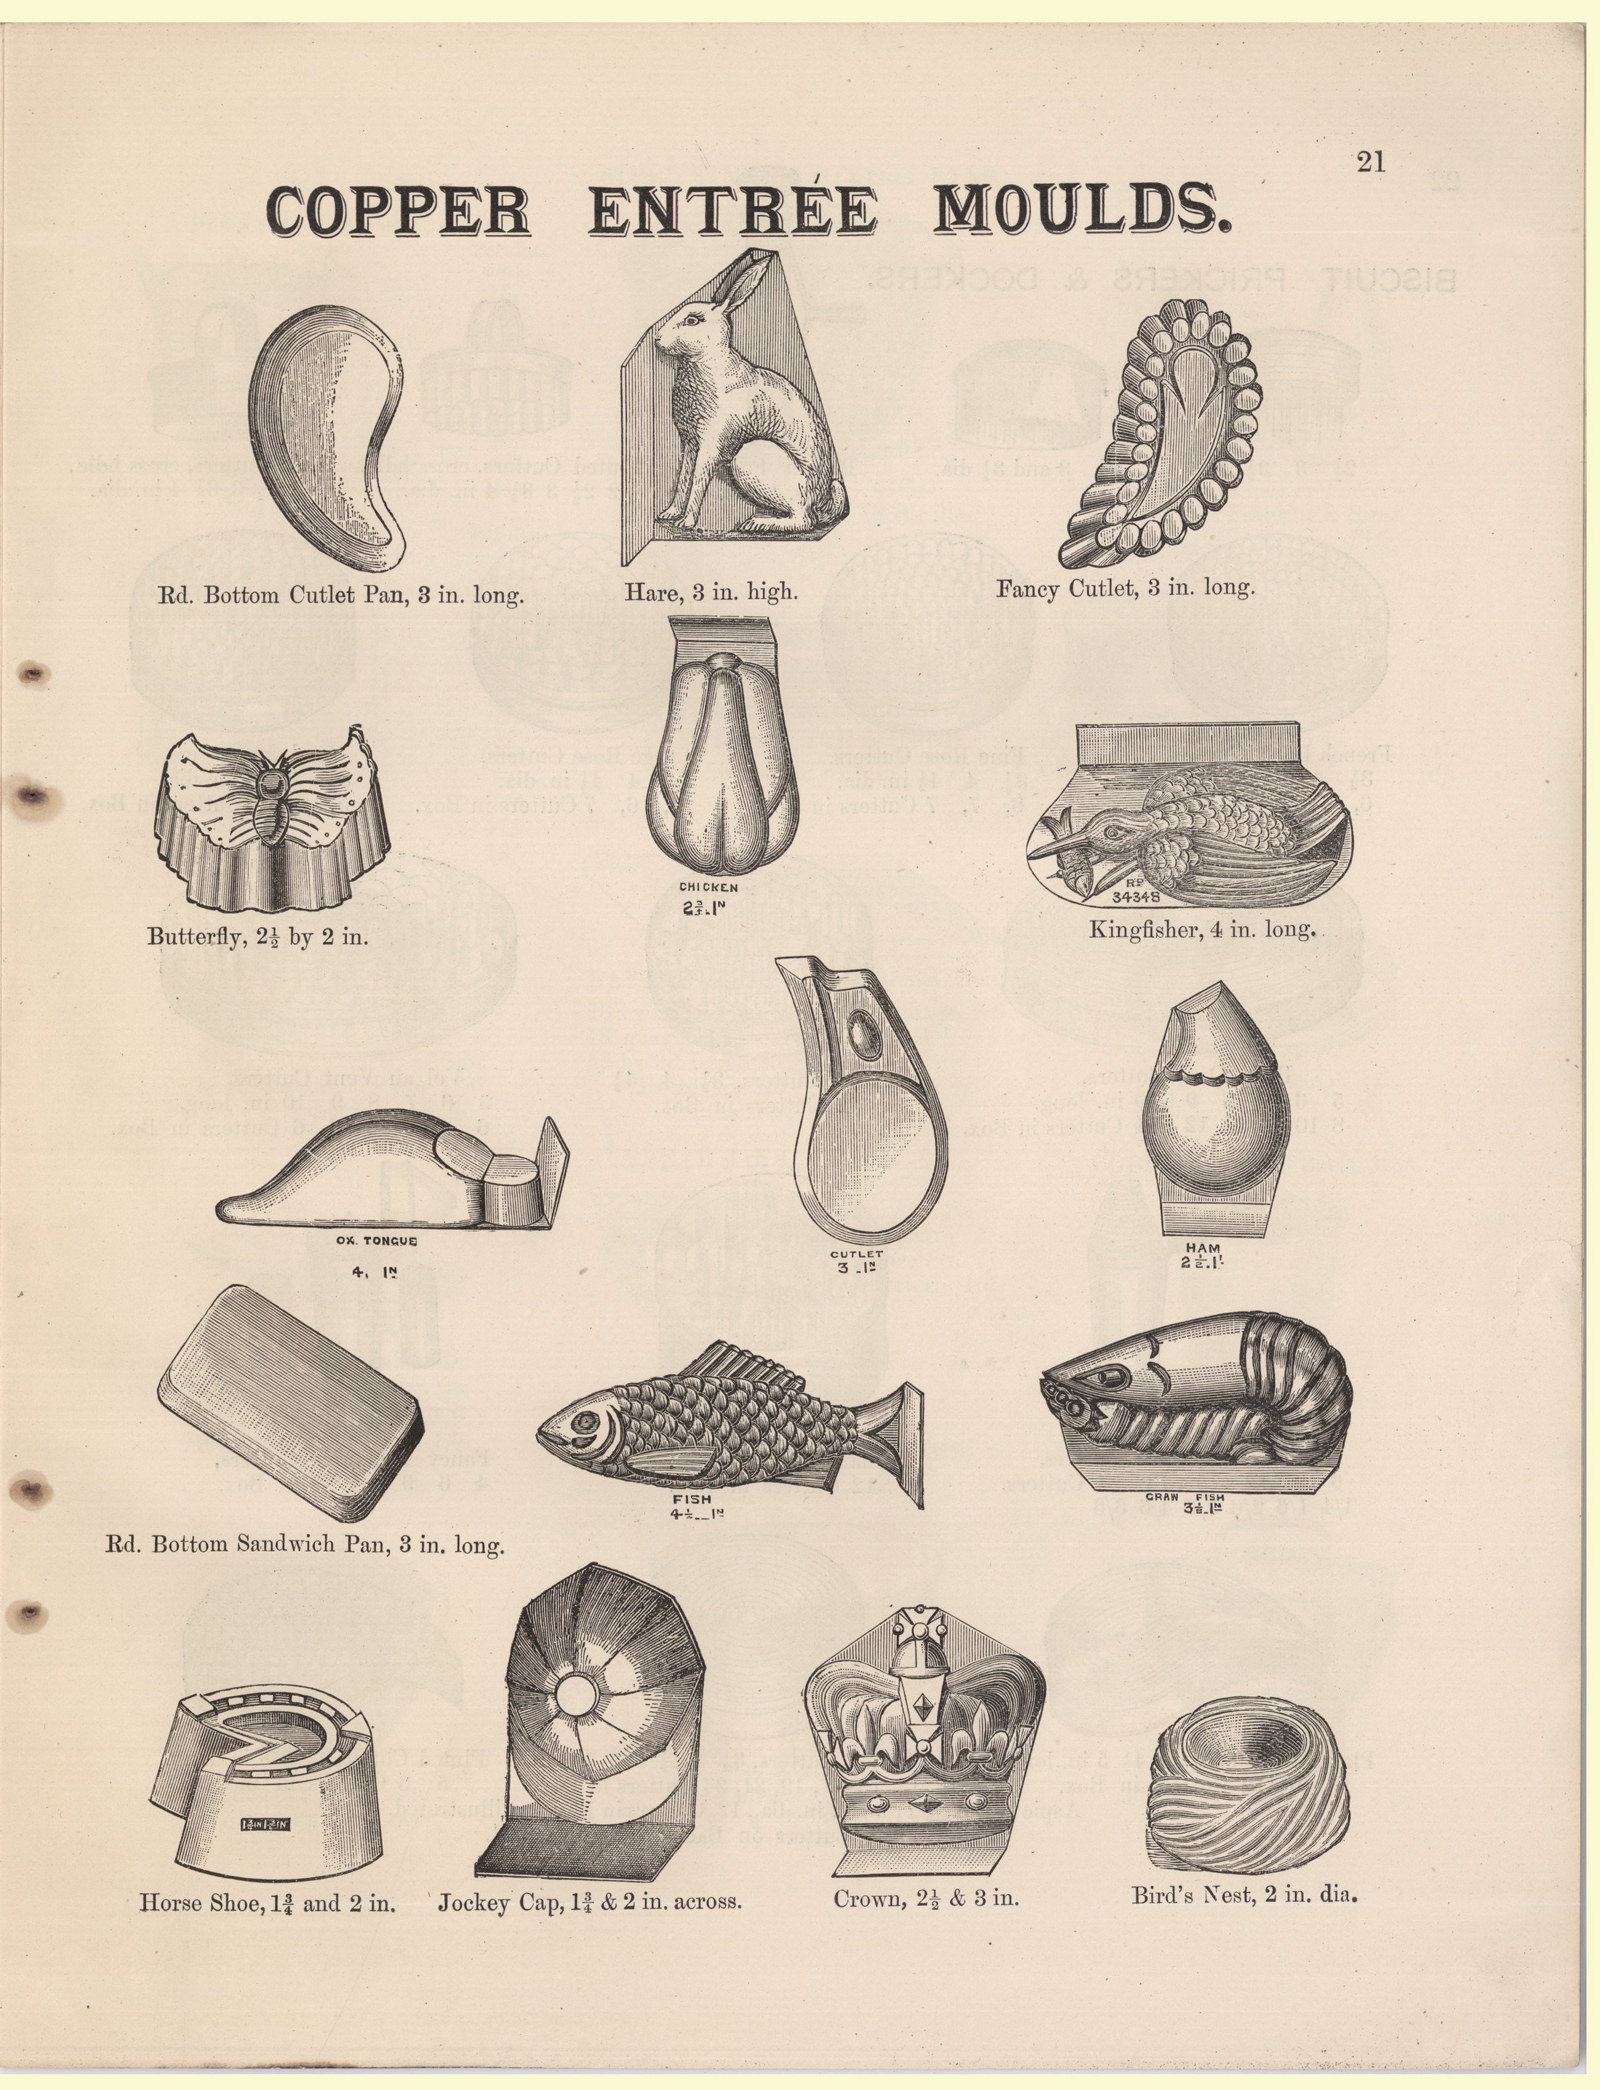 Page from book showing sixteen different entree mould shapes.